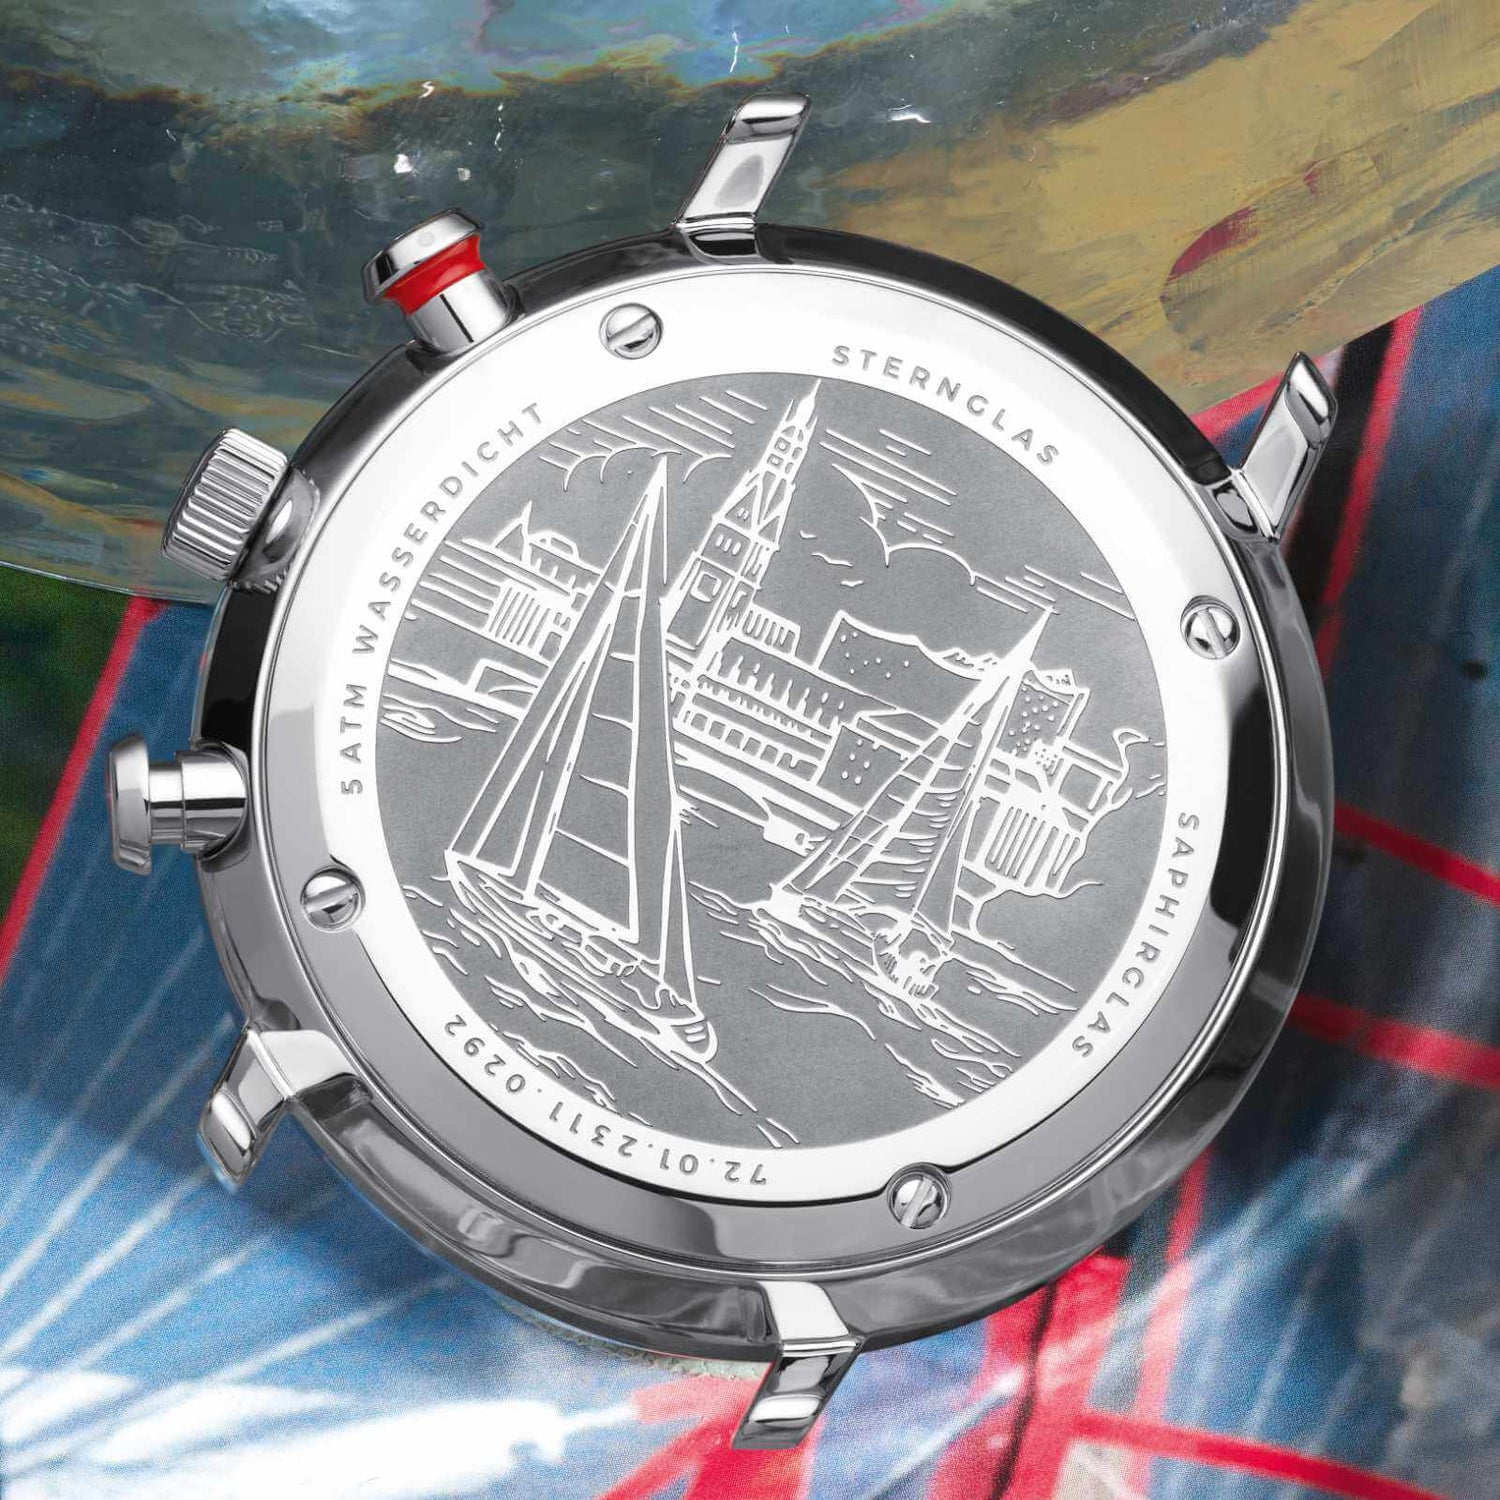 popup|Regatta engraving on the case back|As is typical for STERNGLAS timepieces, the engraving here is also a real eye-catcher: it shows two sailing boats on the Outer Alster. A symbol of adventure and our connection to our home city of Hamburg.